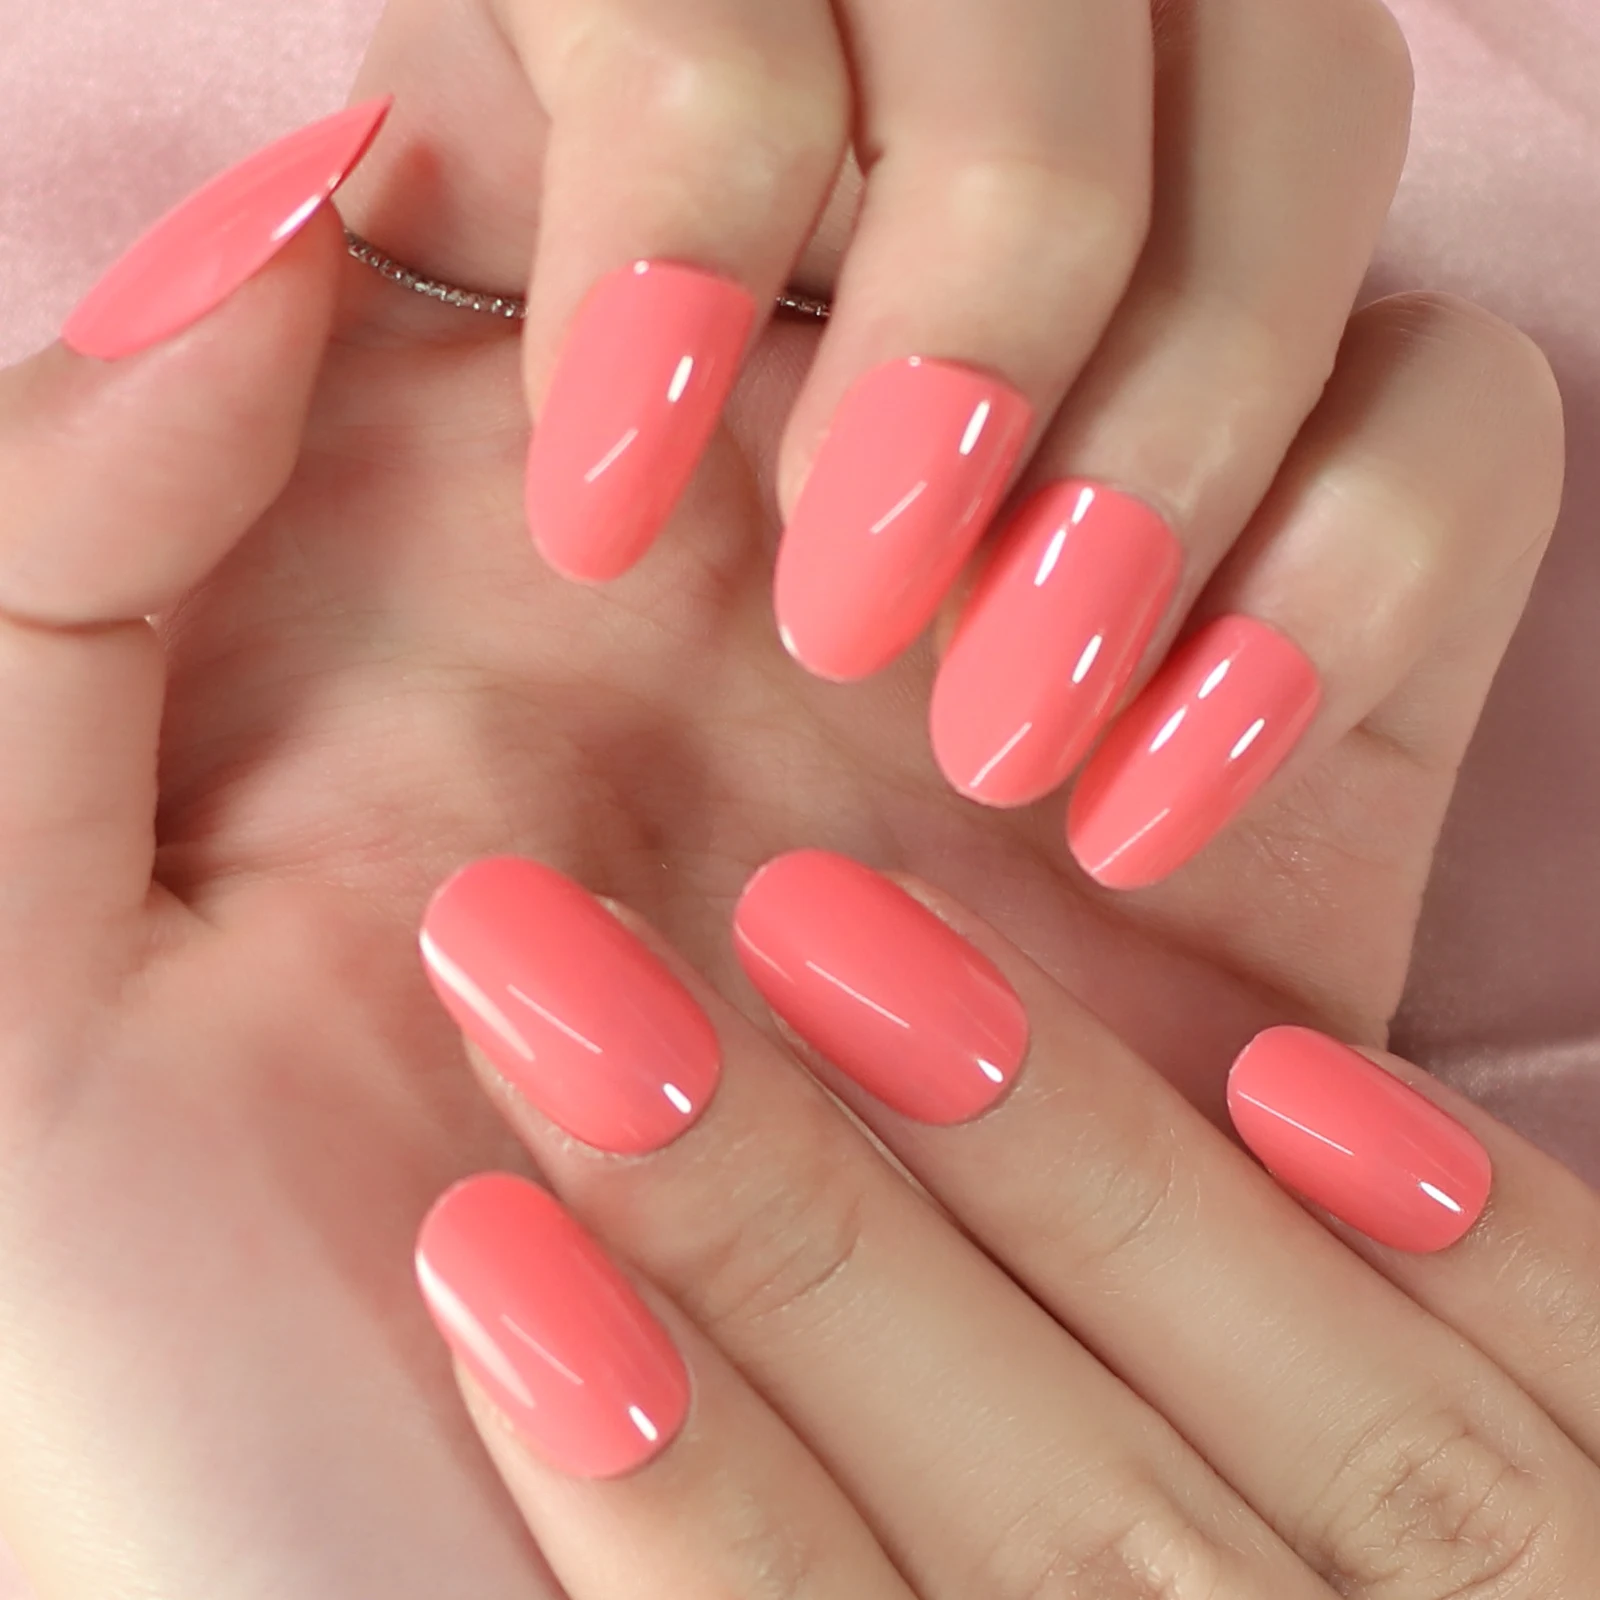 Coral Nail Designs: 45 Trendiest Looks and Colors | Coral nails with  design, Coral nails, Coral acrylic nails